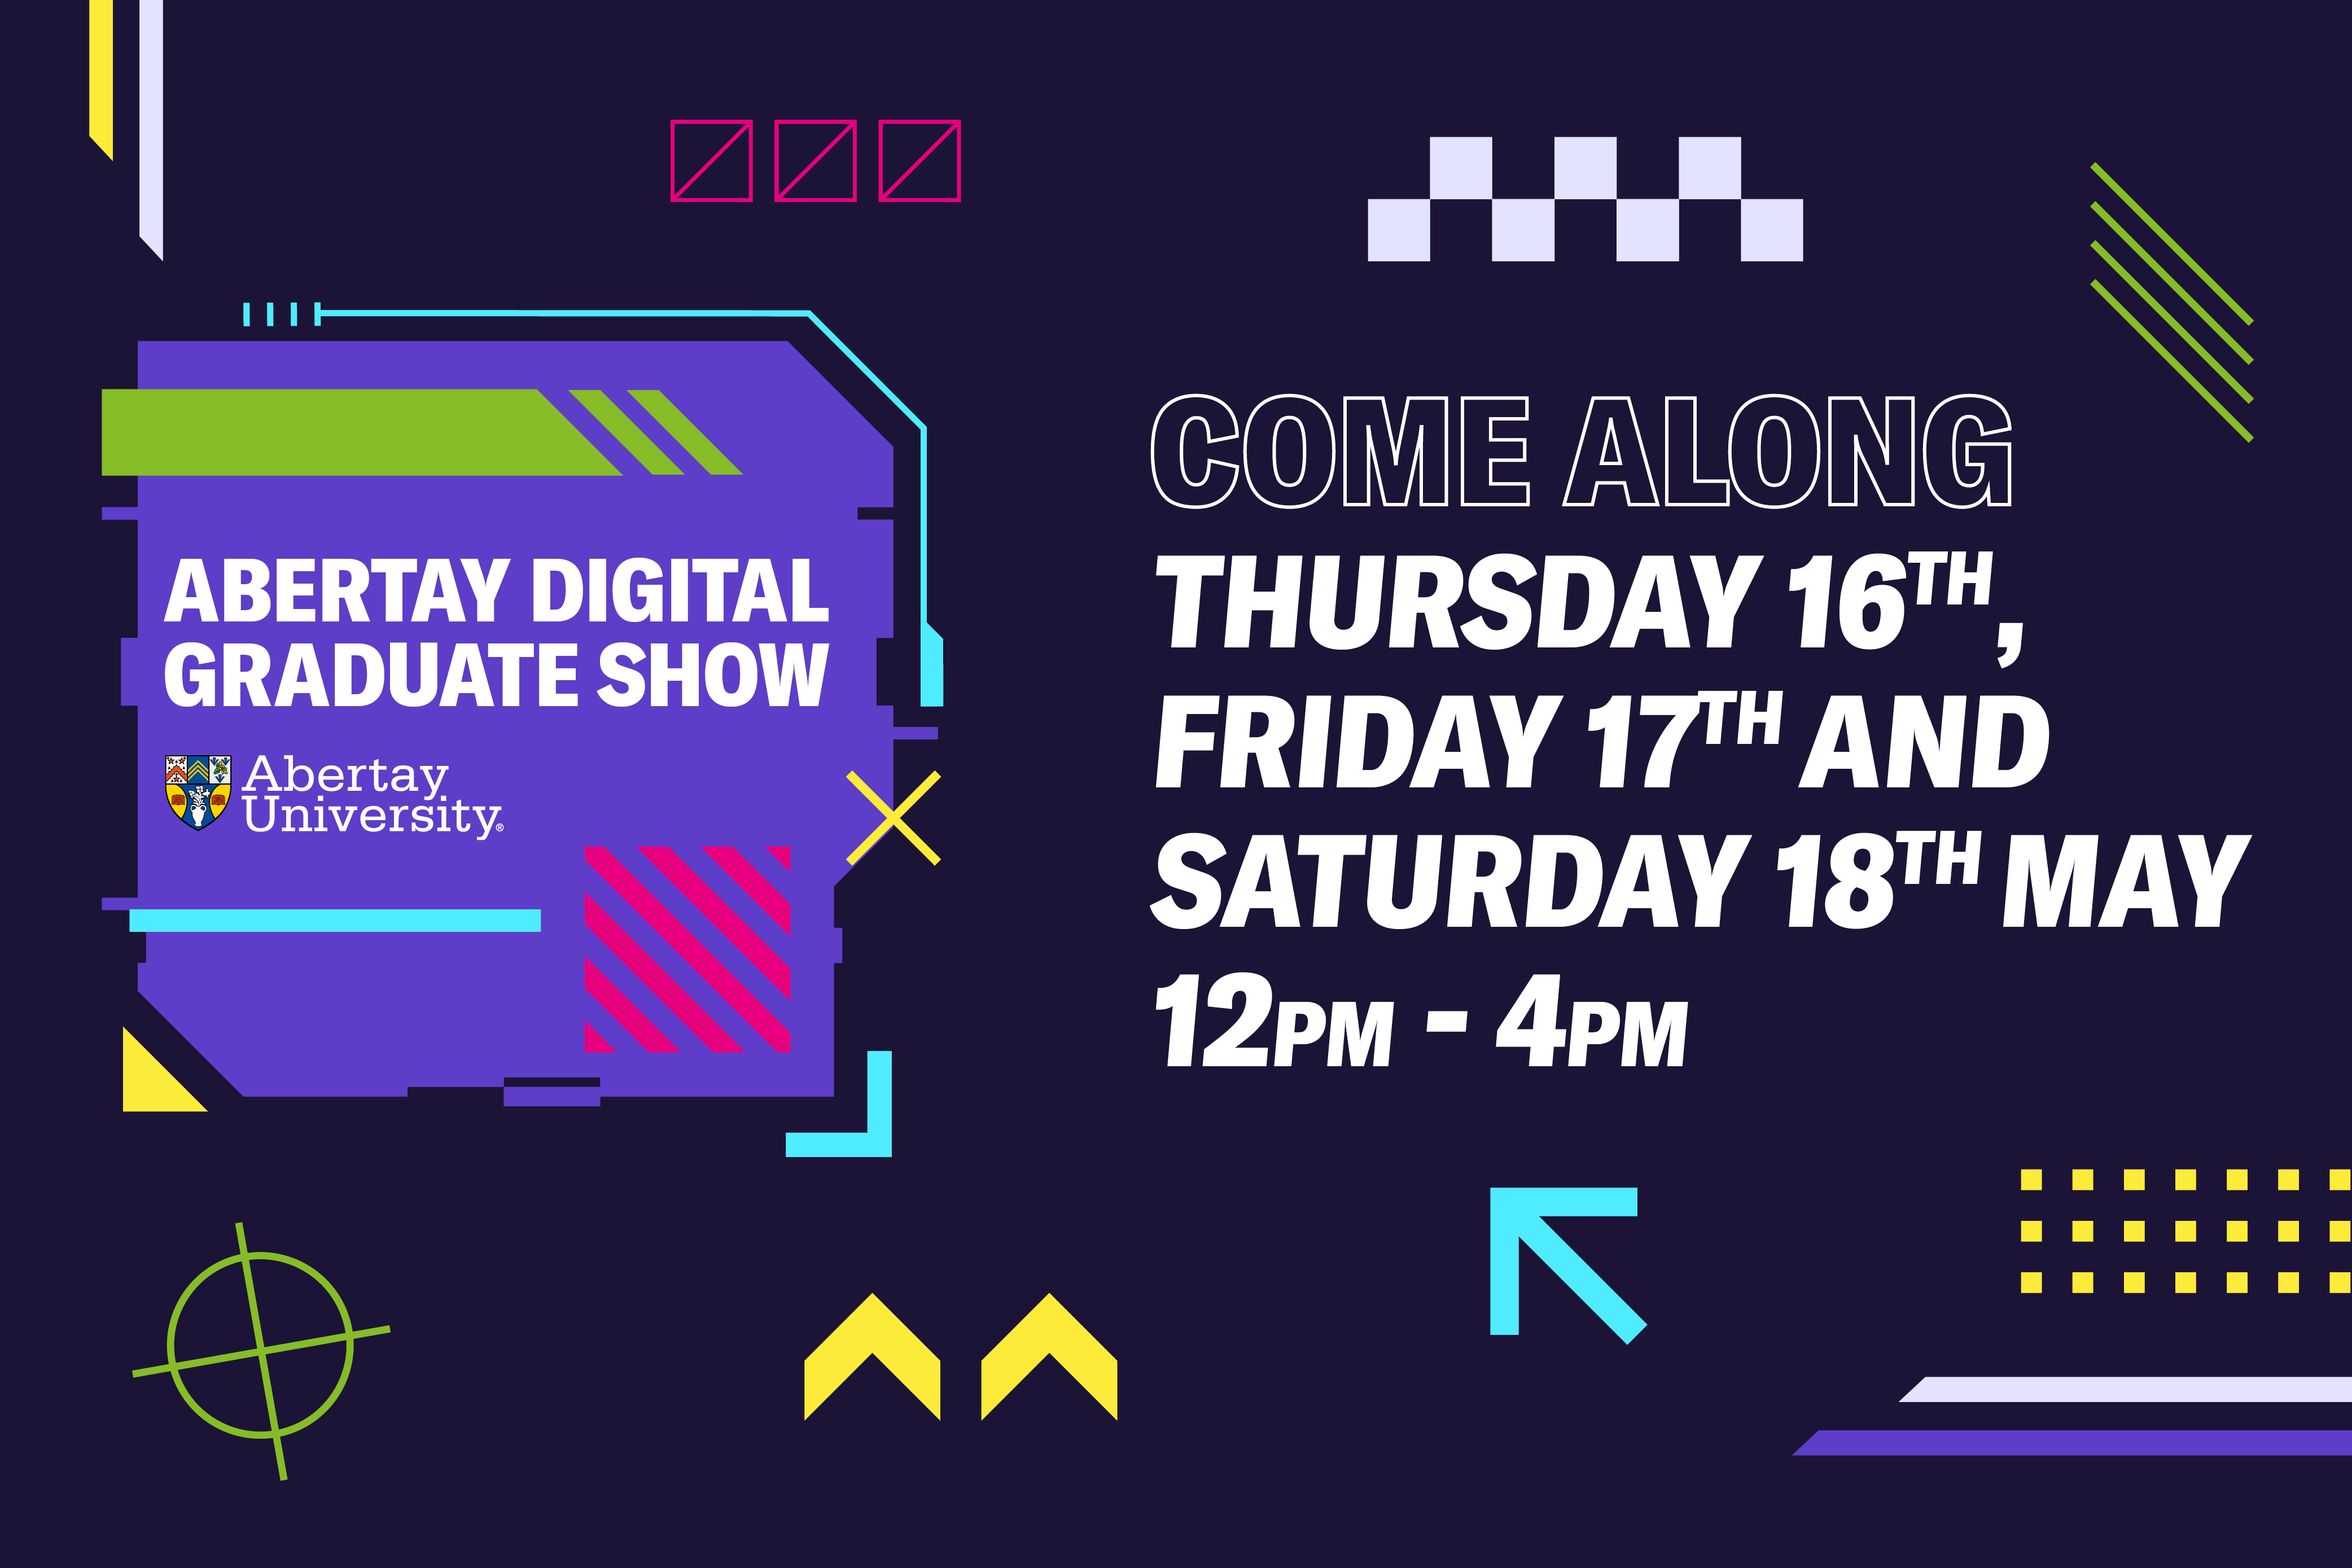 What's on at the Abertay Digital Graduate Show?